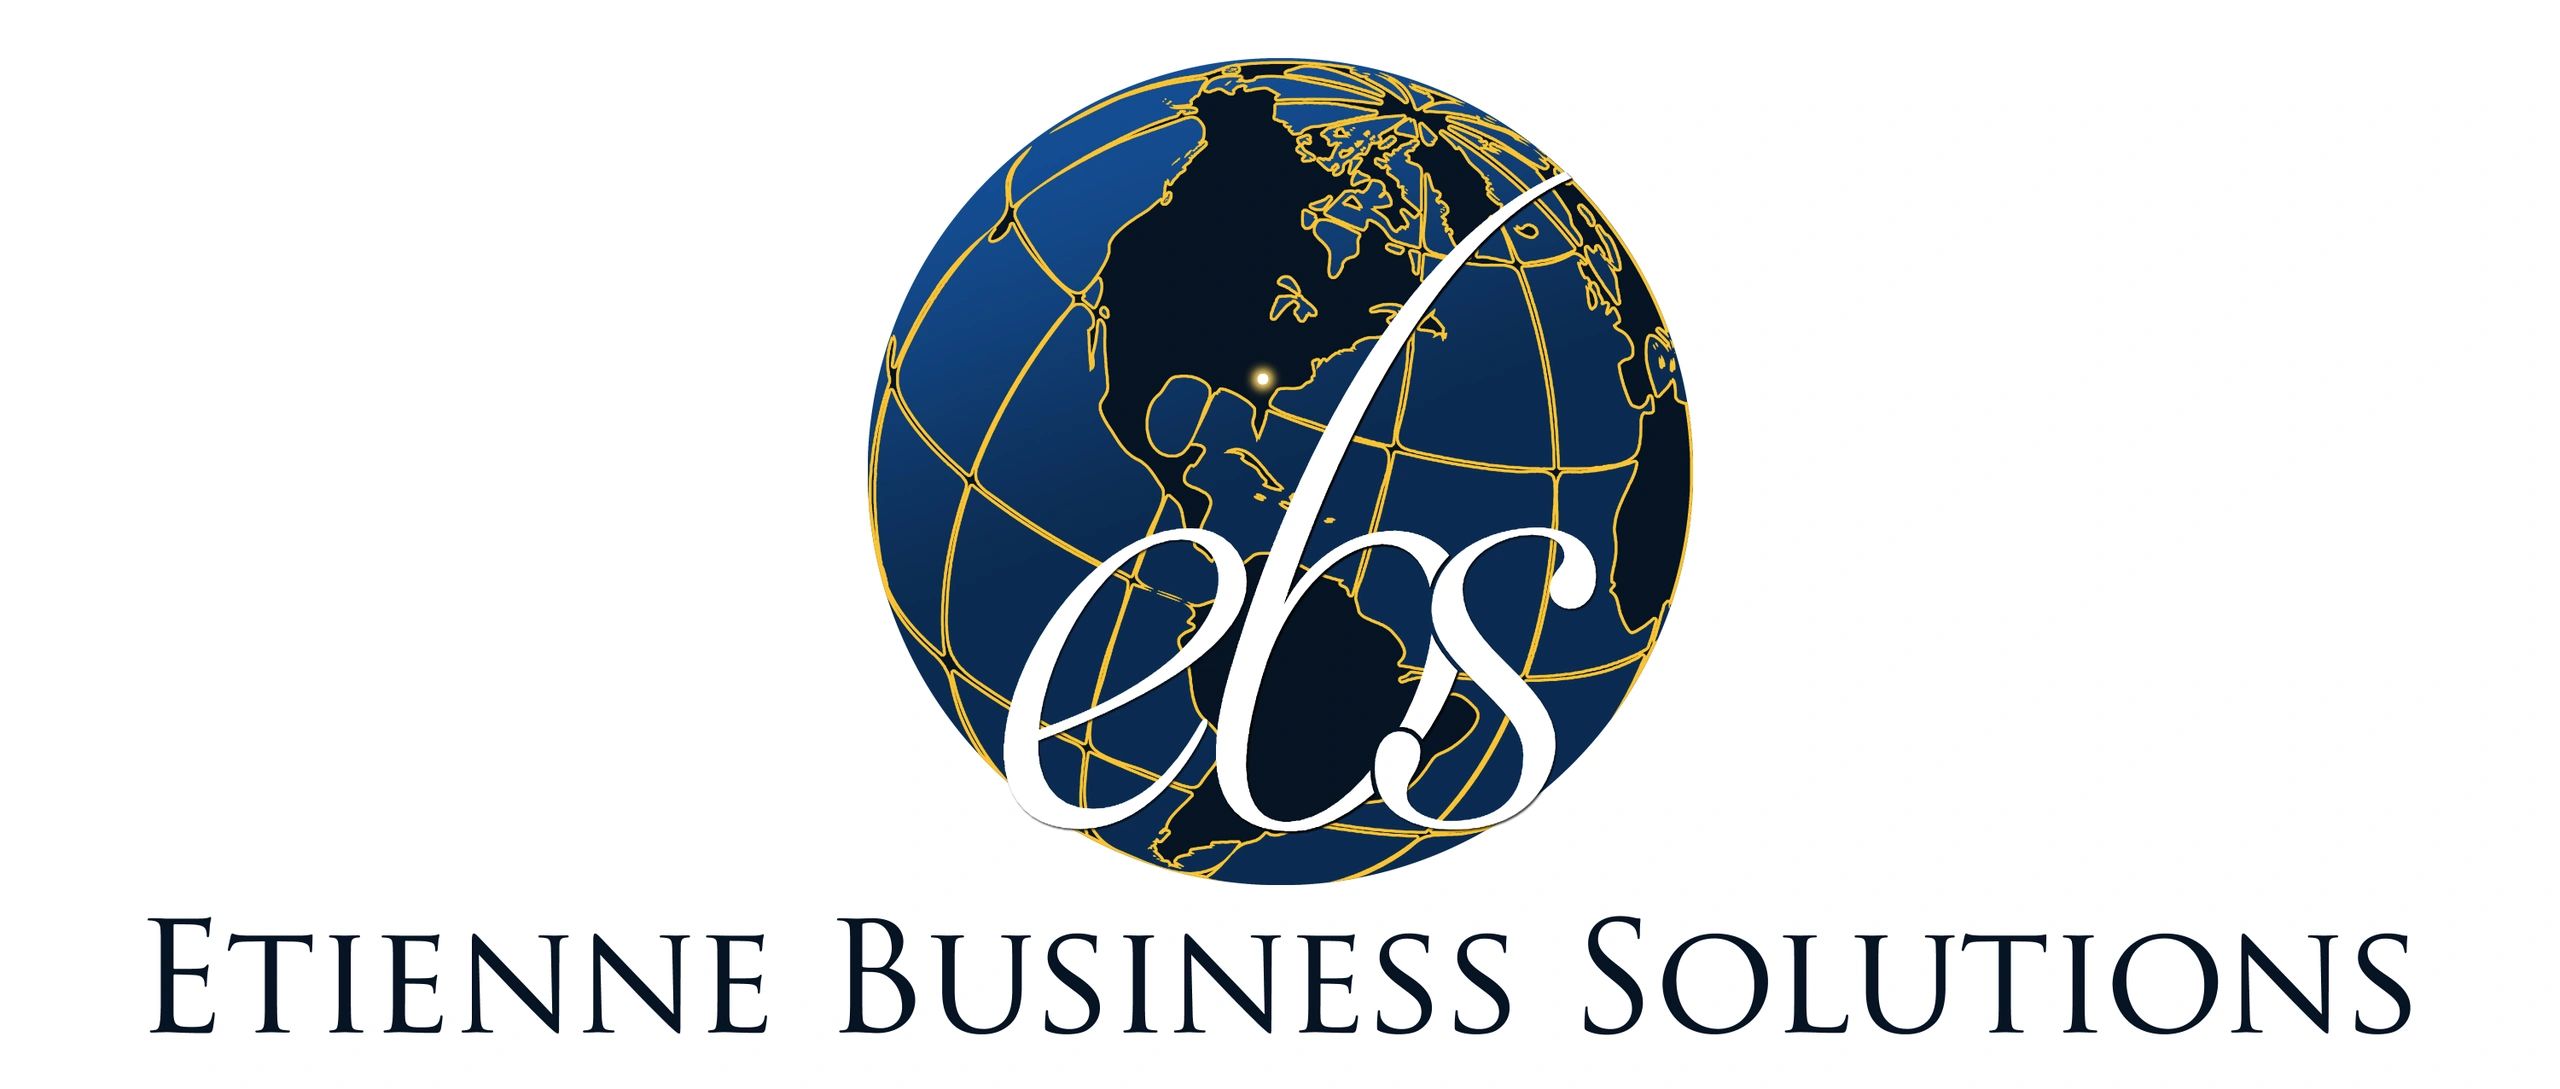 Etienne Business Solutions